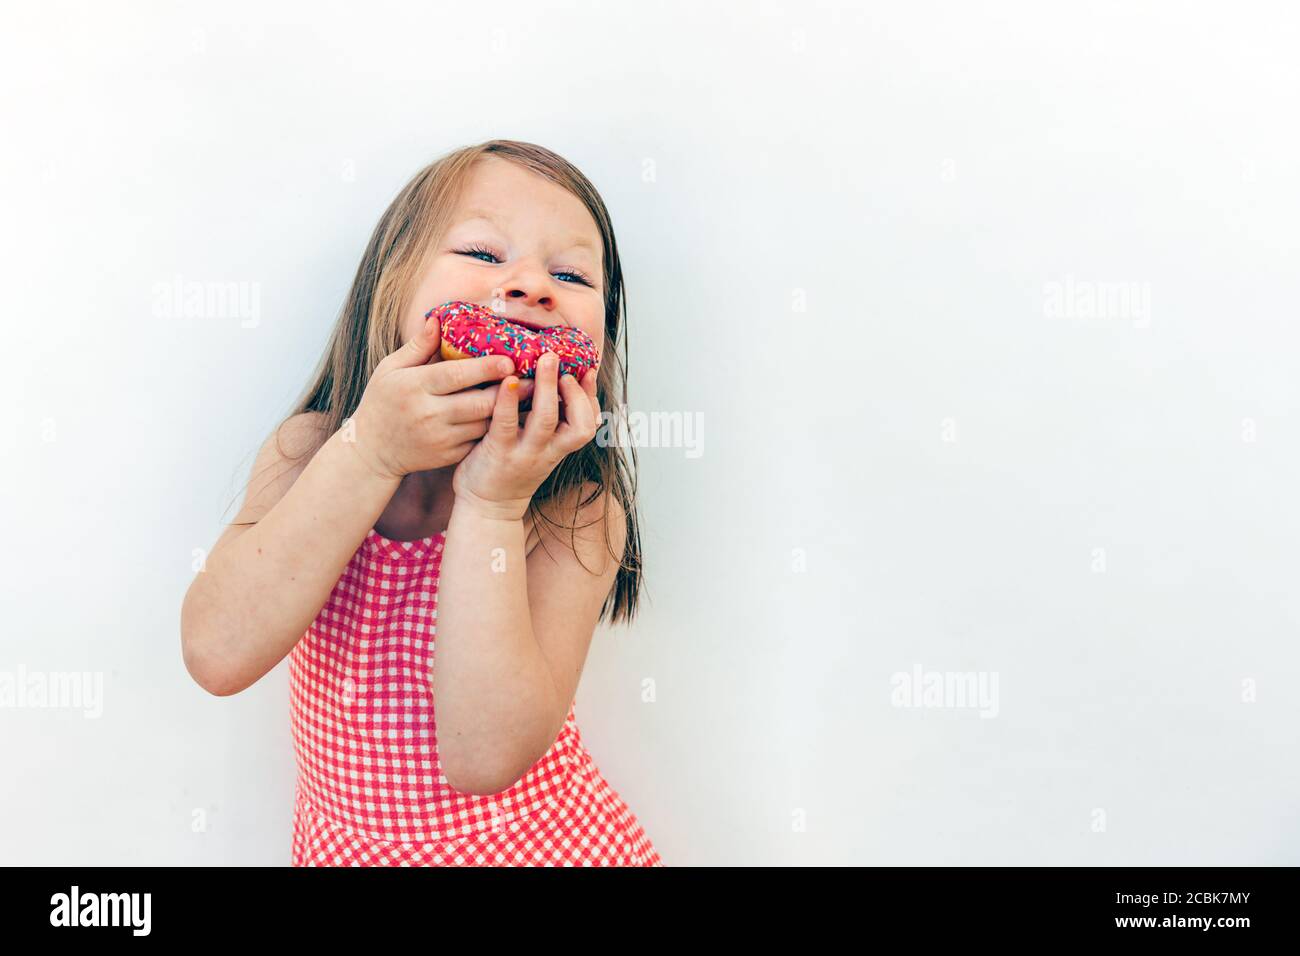 hungry happy girl eating donuts. kid holding donut with two hands against a white background Stock Photo